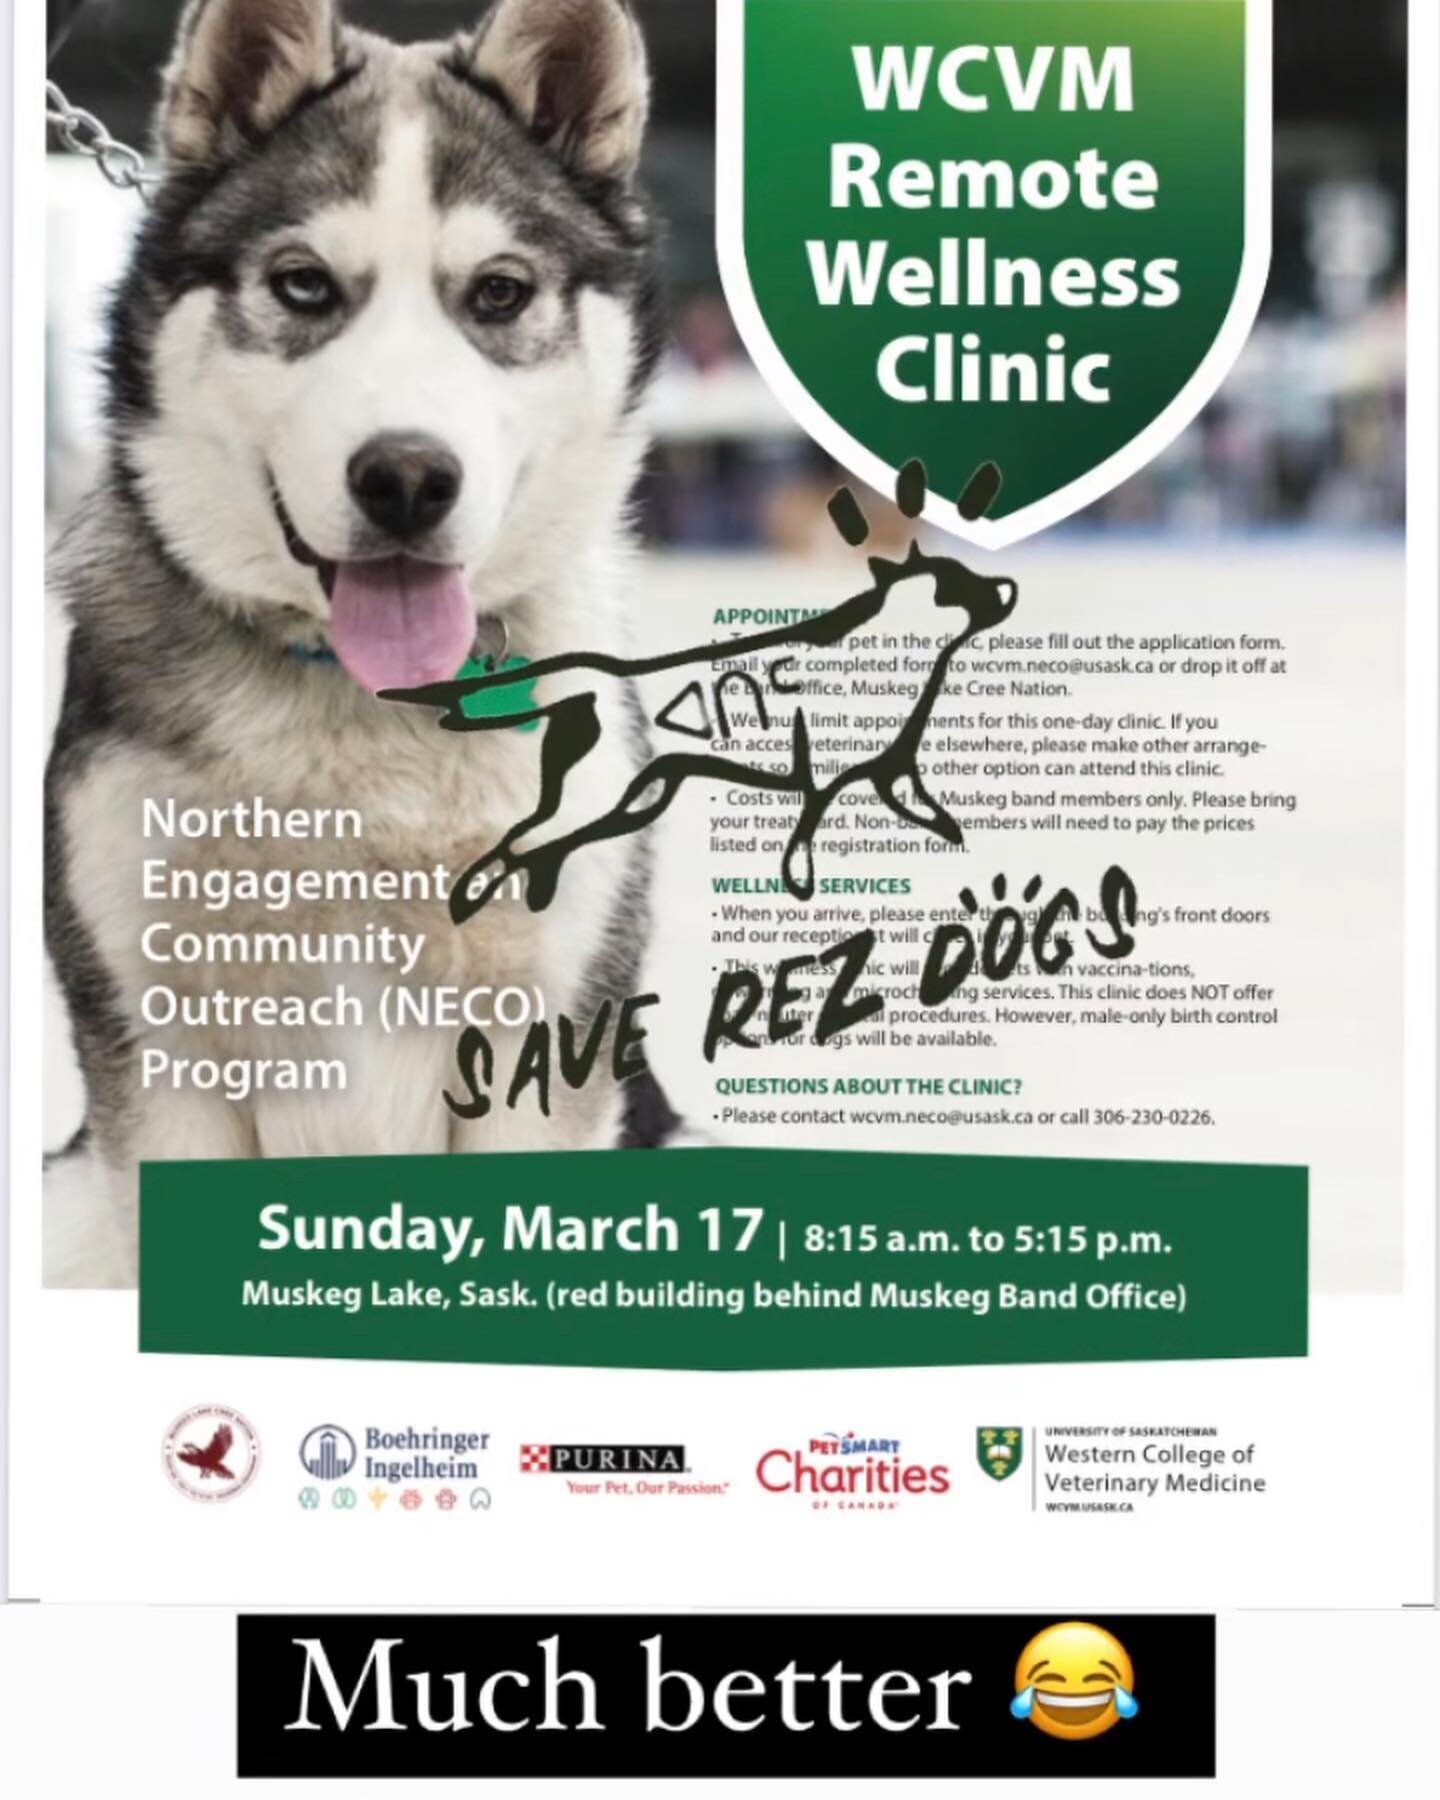 There&rsquo;s a vet wellness clinic for my Rez tomorrow (Muskeg Lake) and I am happy community members can bring in their pets at no charge to them. 🤎 
Progress feels good, even if my logo isn&rsquo;t on the poster. After 5 years of advocating, my R